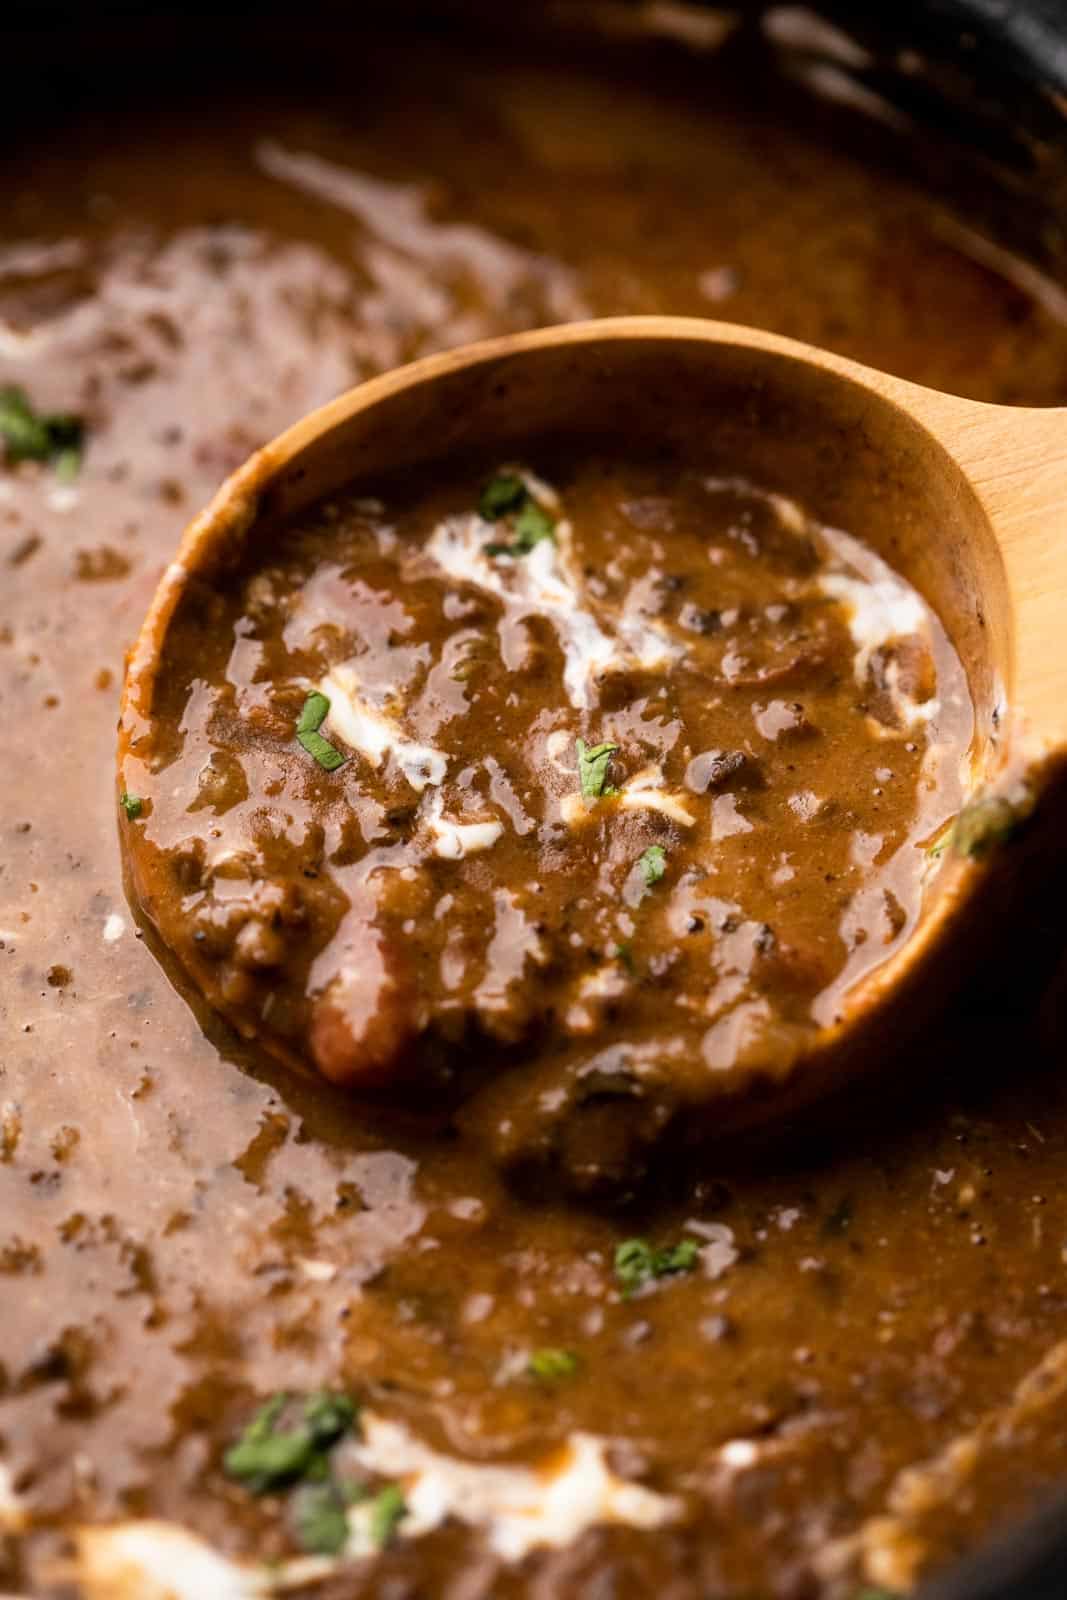 Closeup of a ladleful of dal makhani to show the creamy texture of the lentils